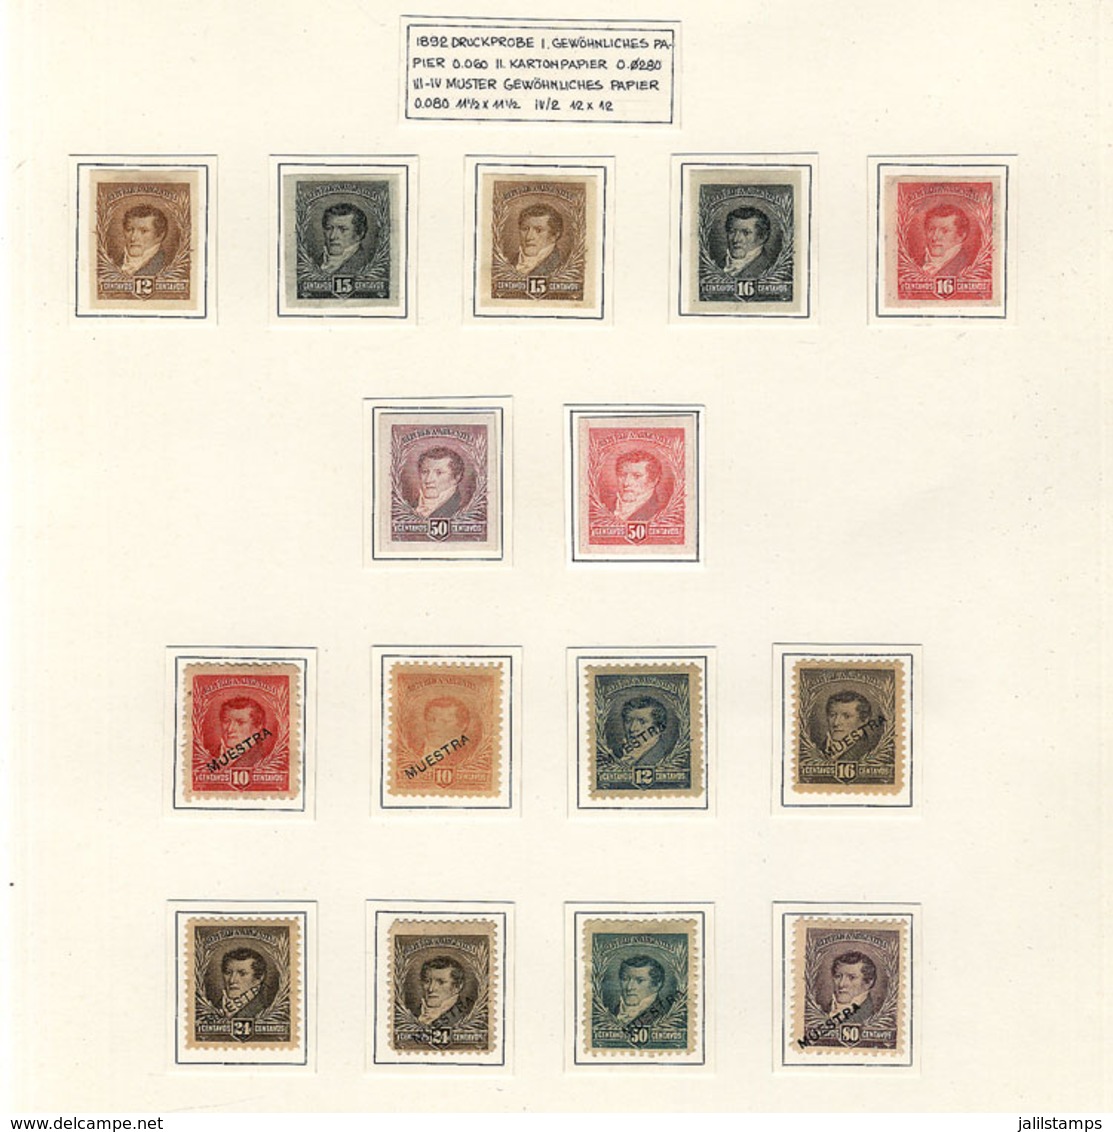 ARGENTINA: "Rivadavia Belgrano & San Martín" Issue: Album Page With 7 Genuine Color Proofs (5 On Thin Paper) + 8 Stamps  - Lots & Serien